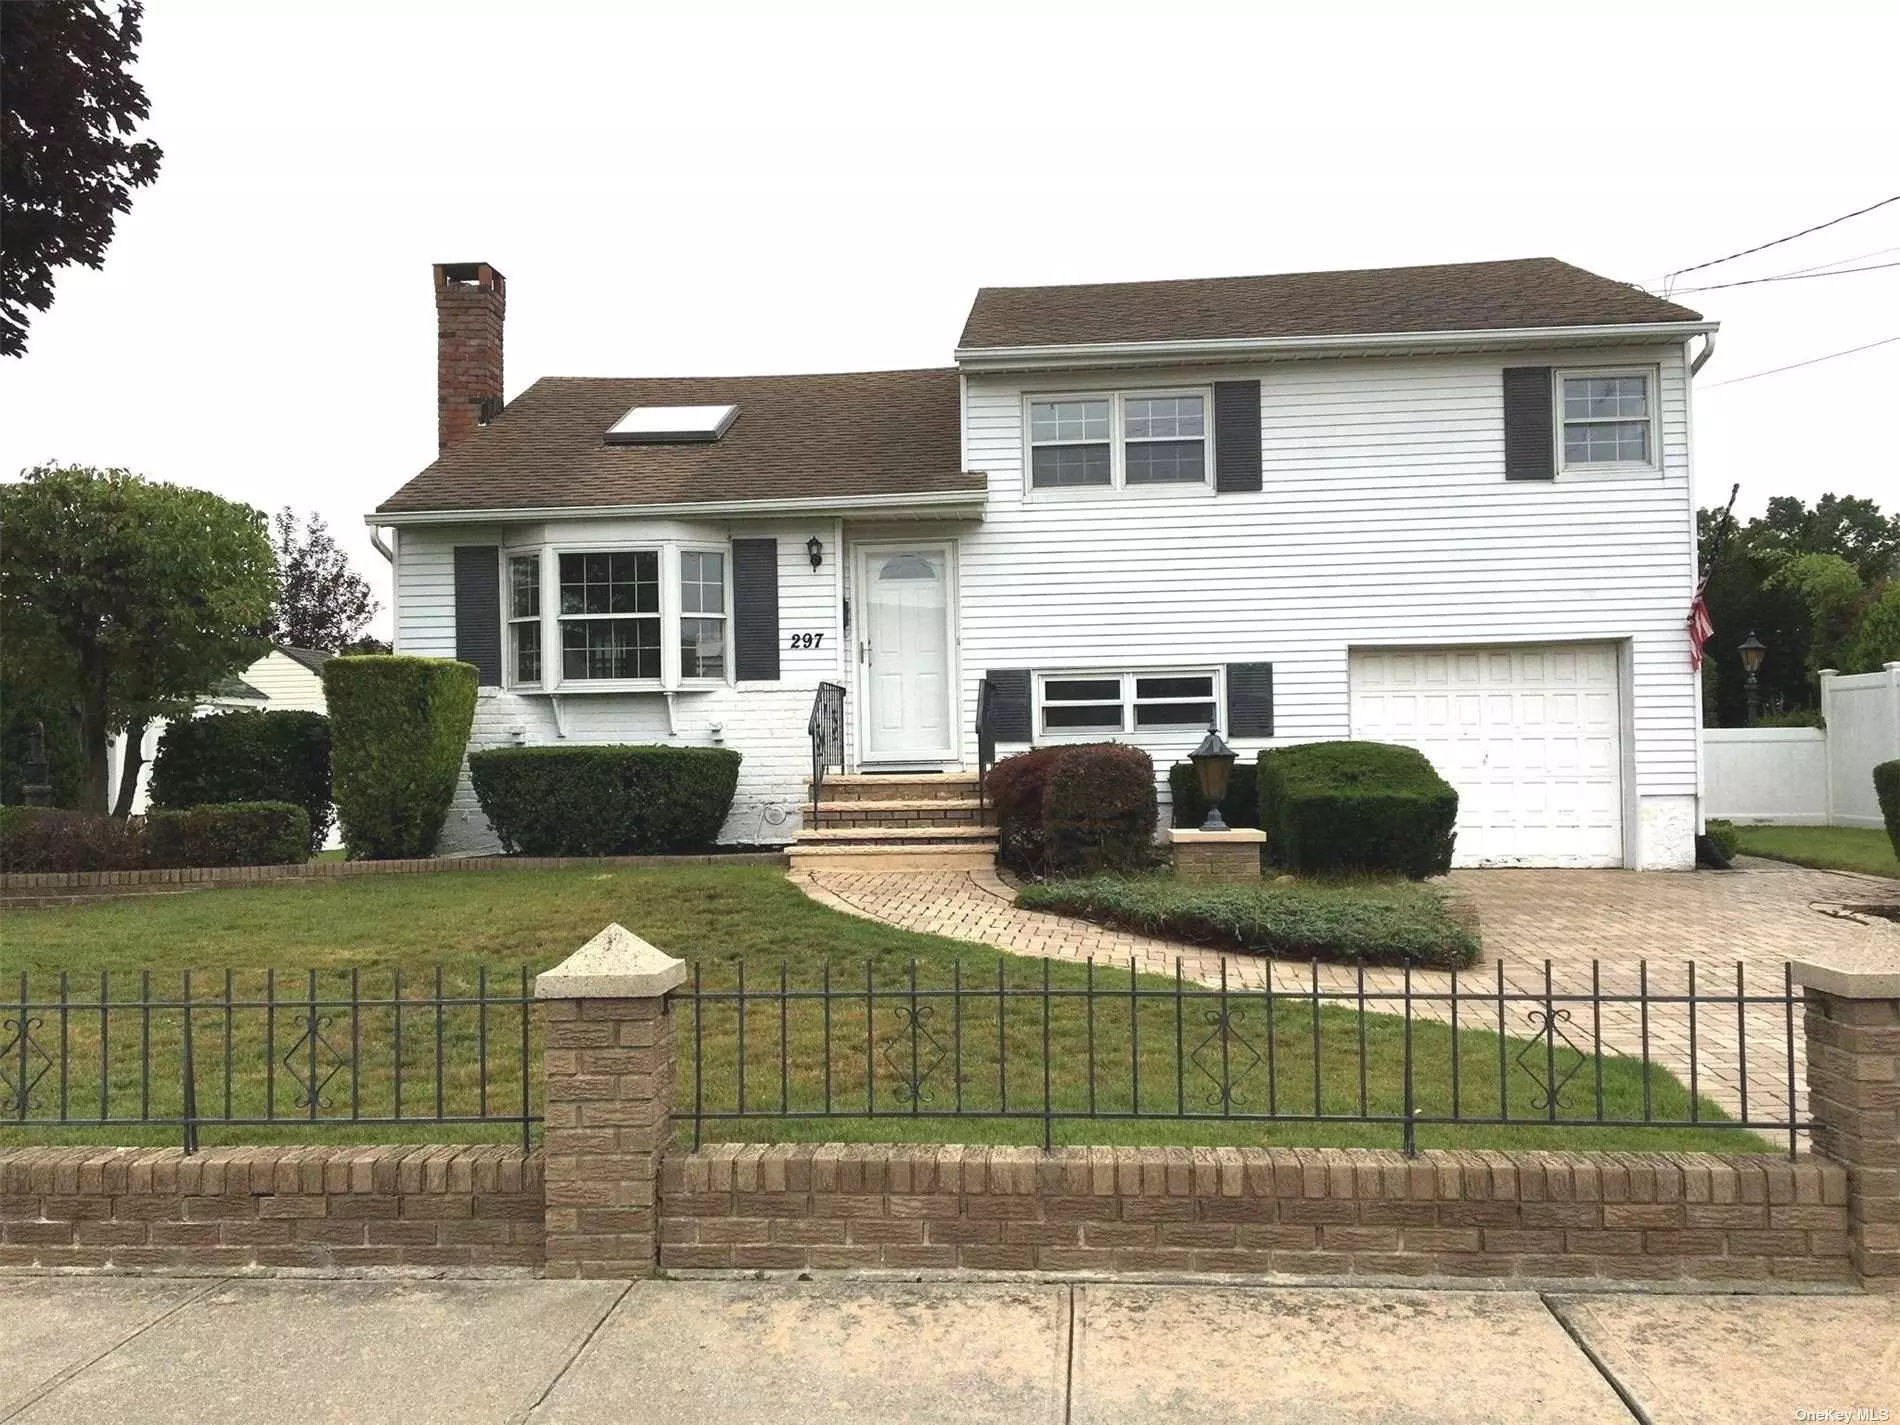 Mid block 3 bedroom 2 bath split level in prime North Massapequa.Updated kitchen with skylight and granite counter top.Living room with skylight.Home office plus family room plus finiished basement /fireplace.Nice size yard.